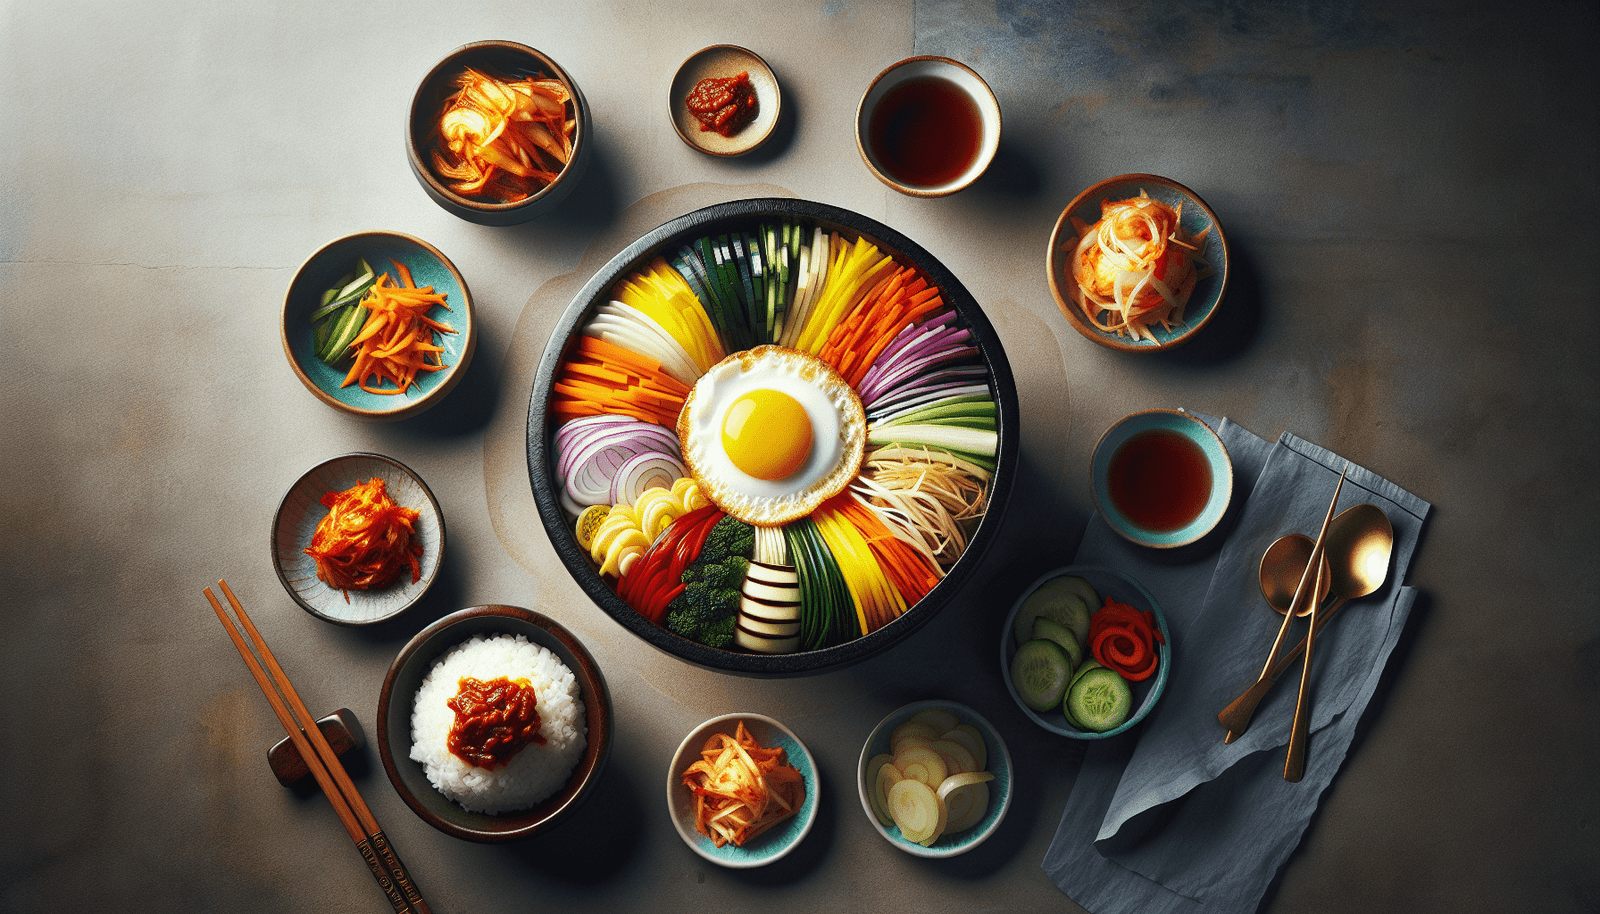 Can You Recommend Korean Dishes That Showcase The Beauty Of Simplicity?